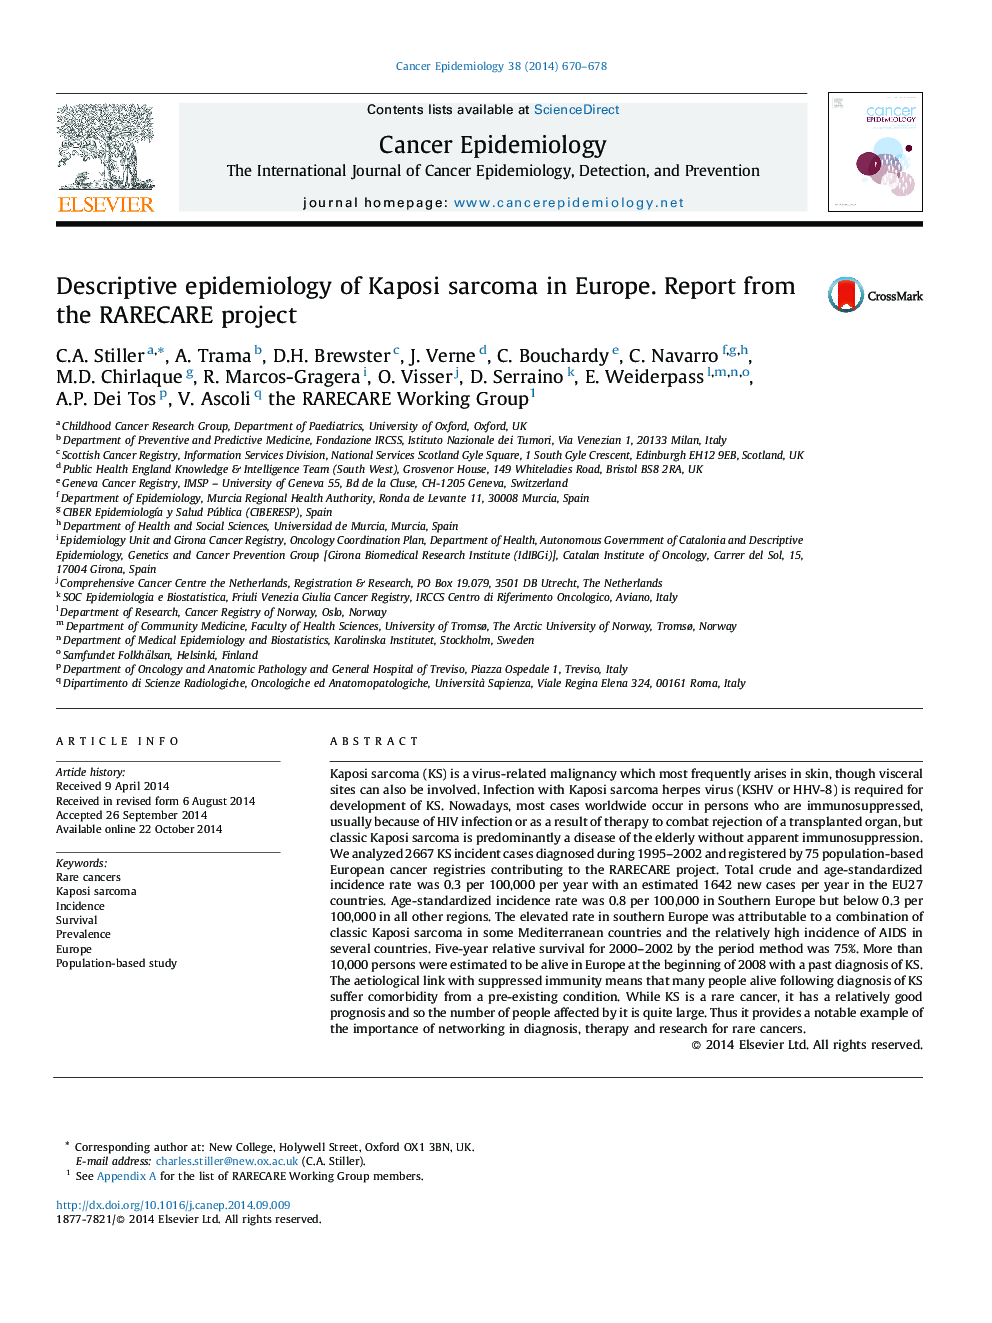 Descriptive epidemiology of Kaposi sarcoma in Europe. Report from the RARECARE project